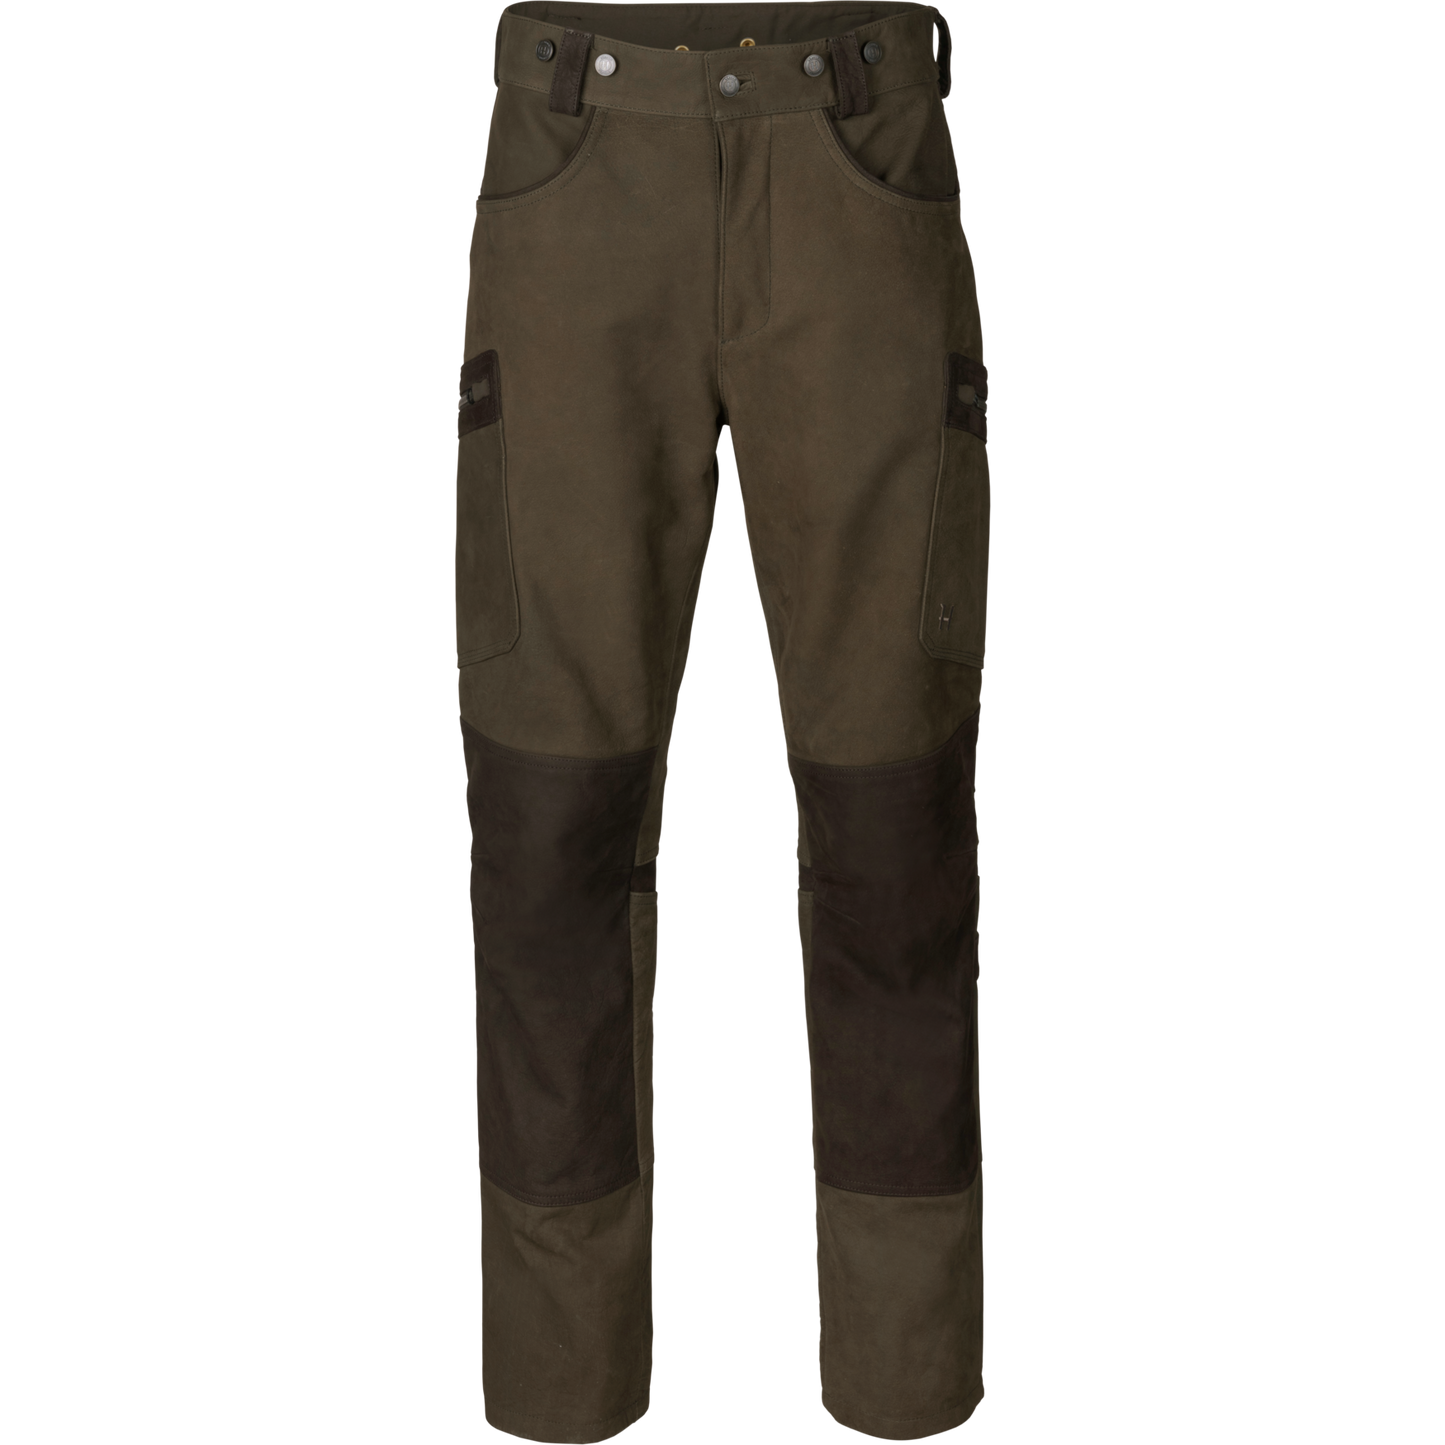 Pro Hunter leather trousers